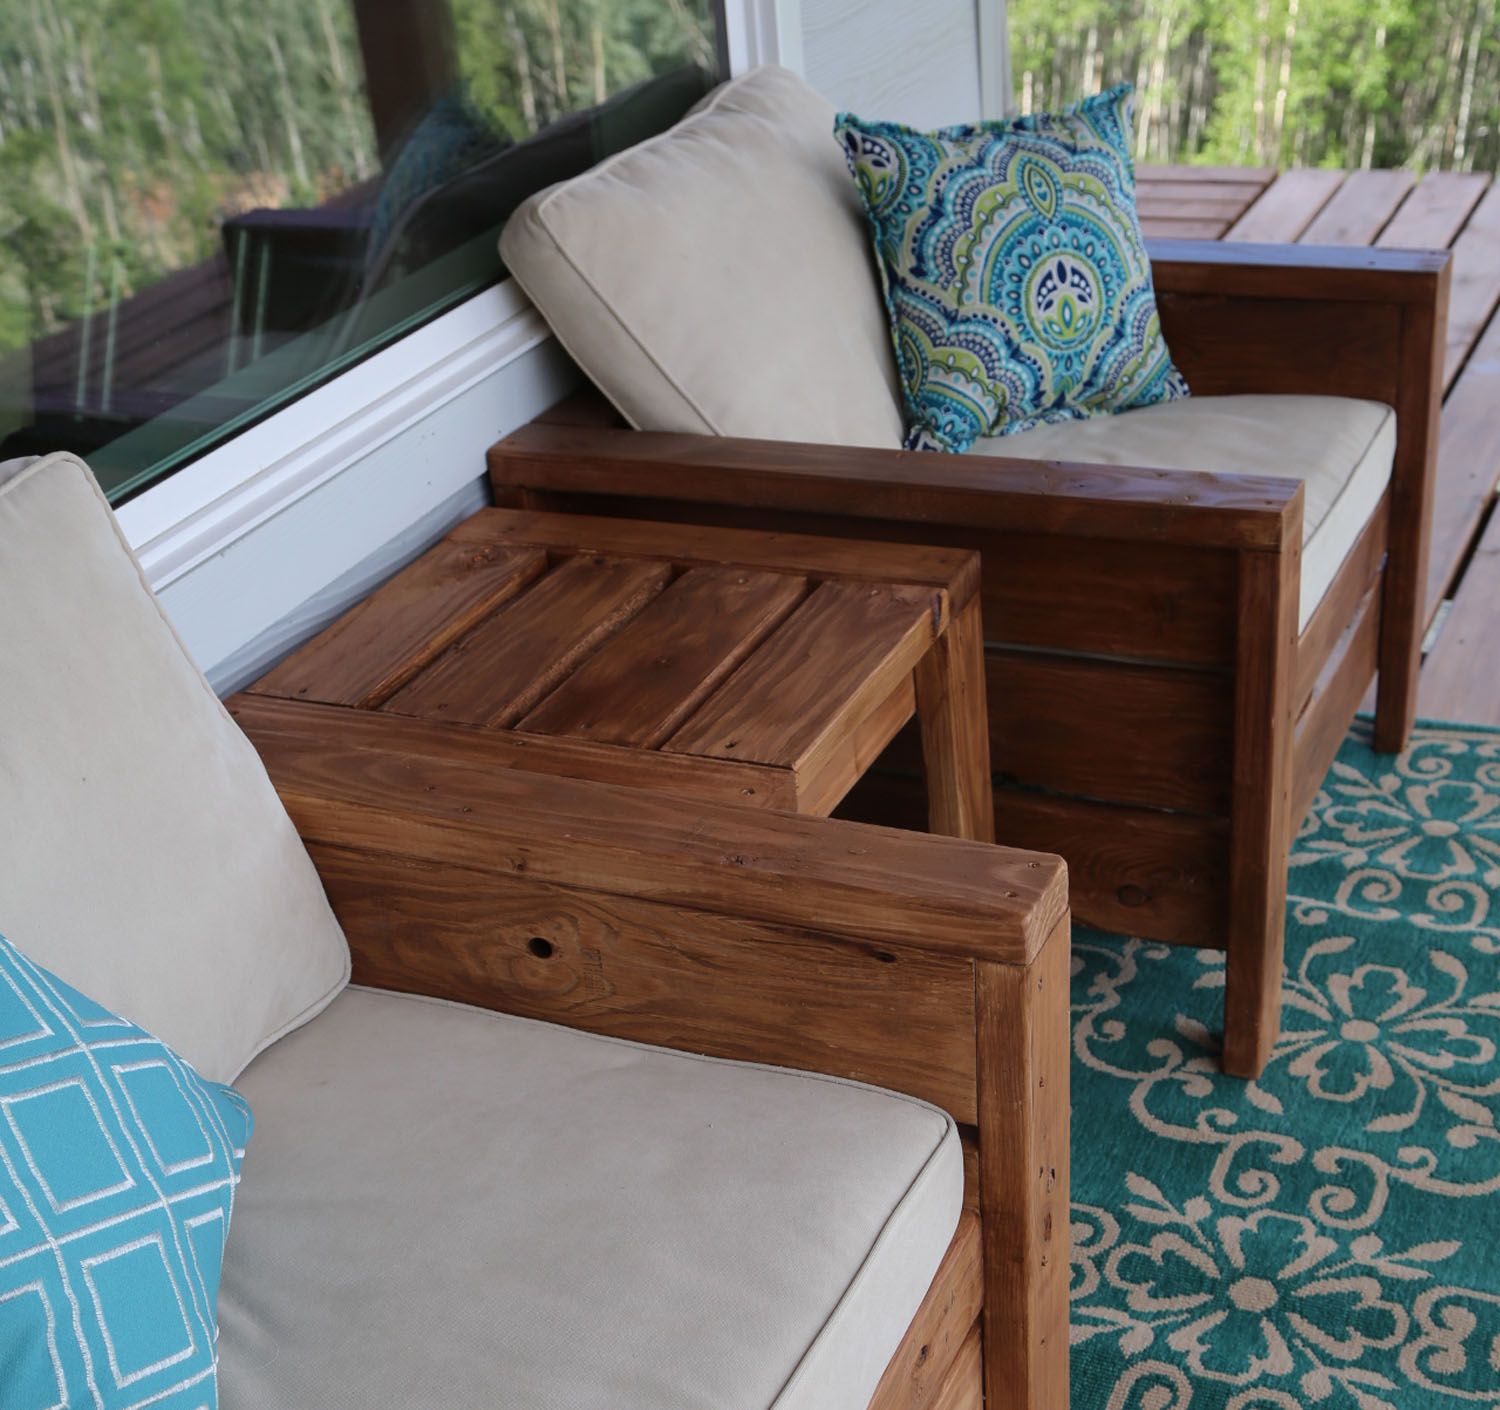 Ana White | Modern Outdoor Chair From 2x4s And 2x6s – Diy Projects In Chari Media Center Tables (View 13 of 30)